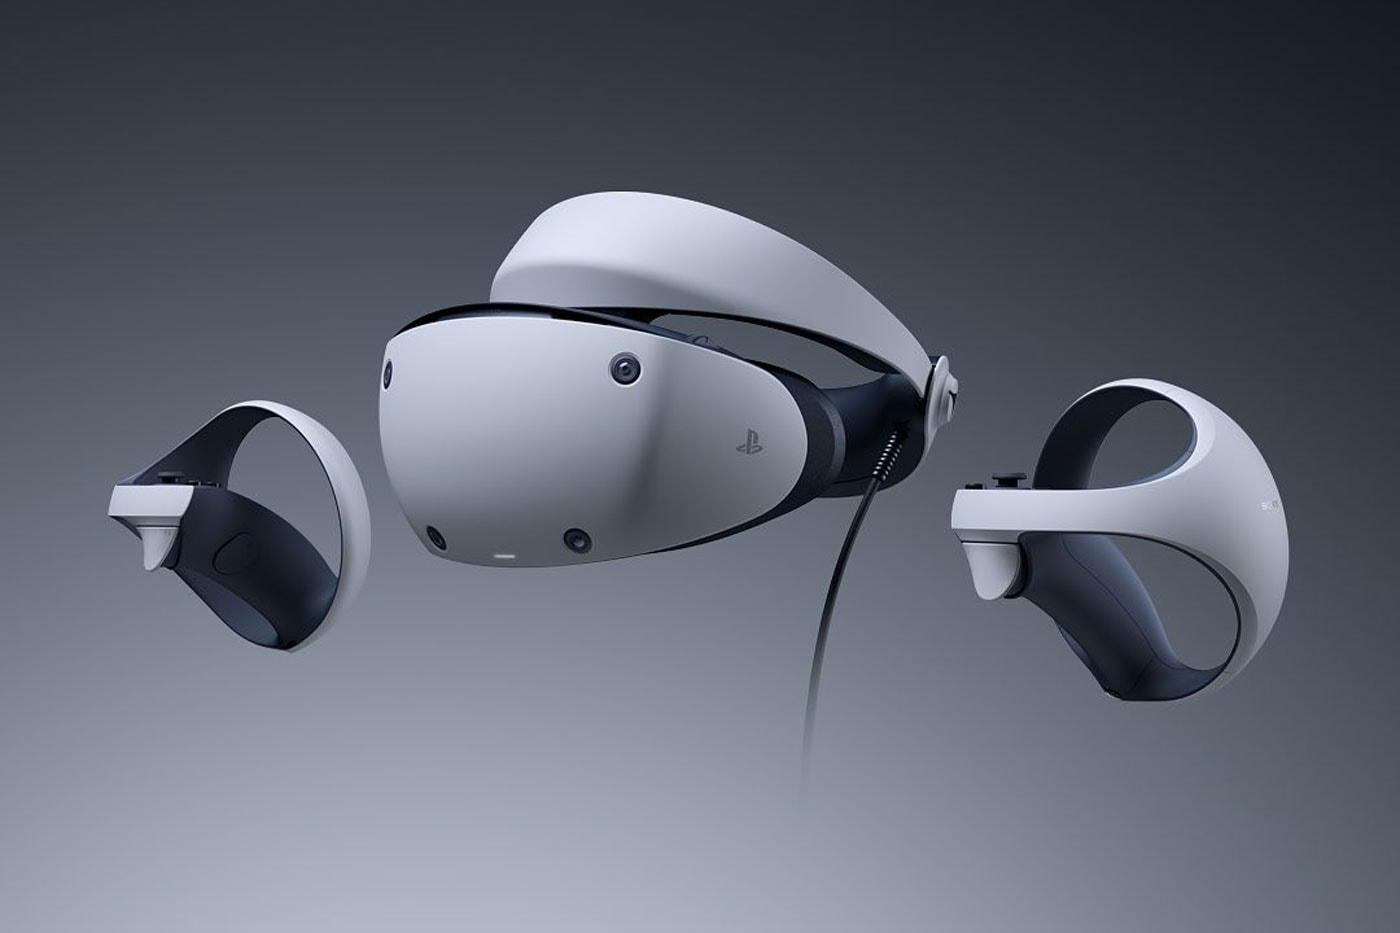 Sony confirms next-gen VR system for PlayStation 5 - just not in